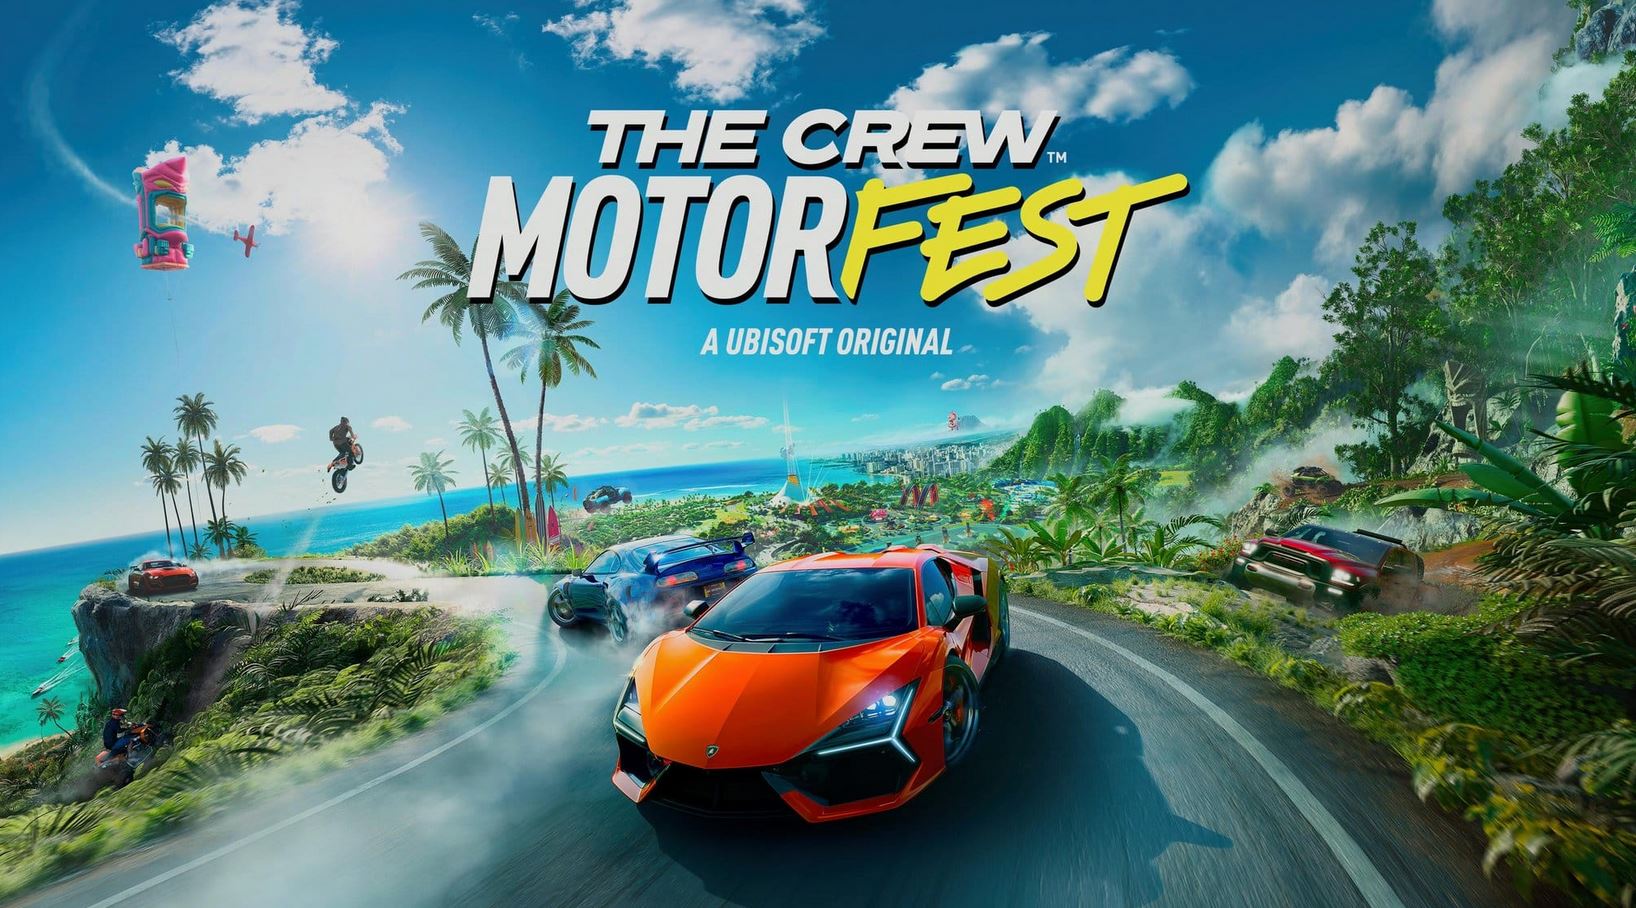 Buy SOFTWARE PLAYSTATION PS4 Game The Crew Motorfest at Best price